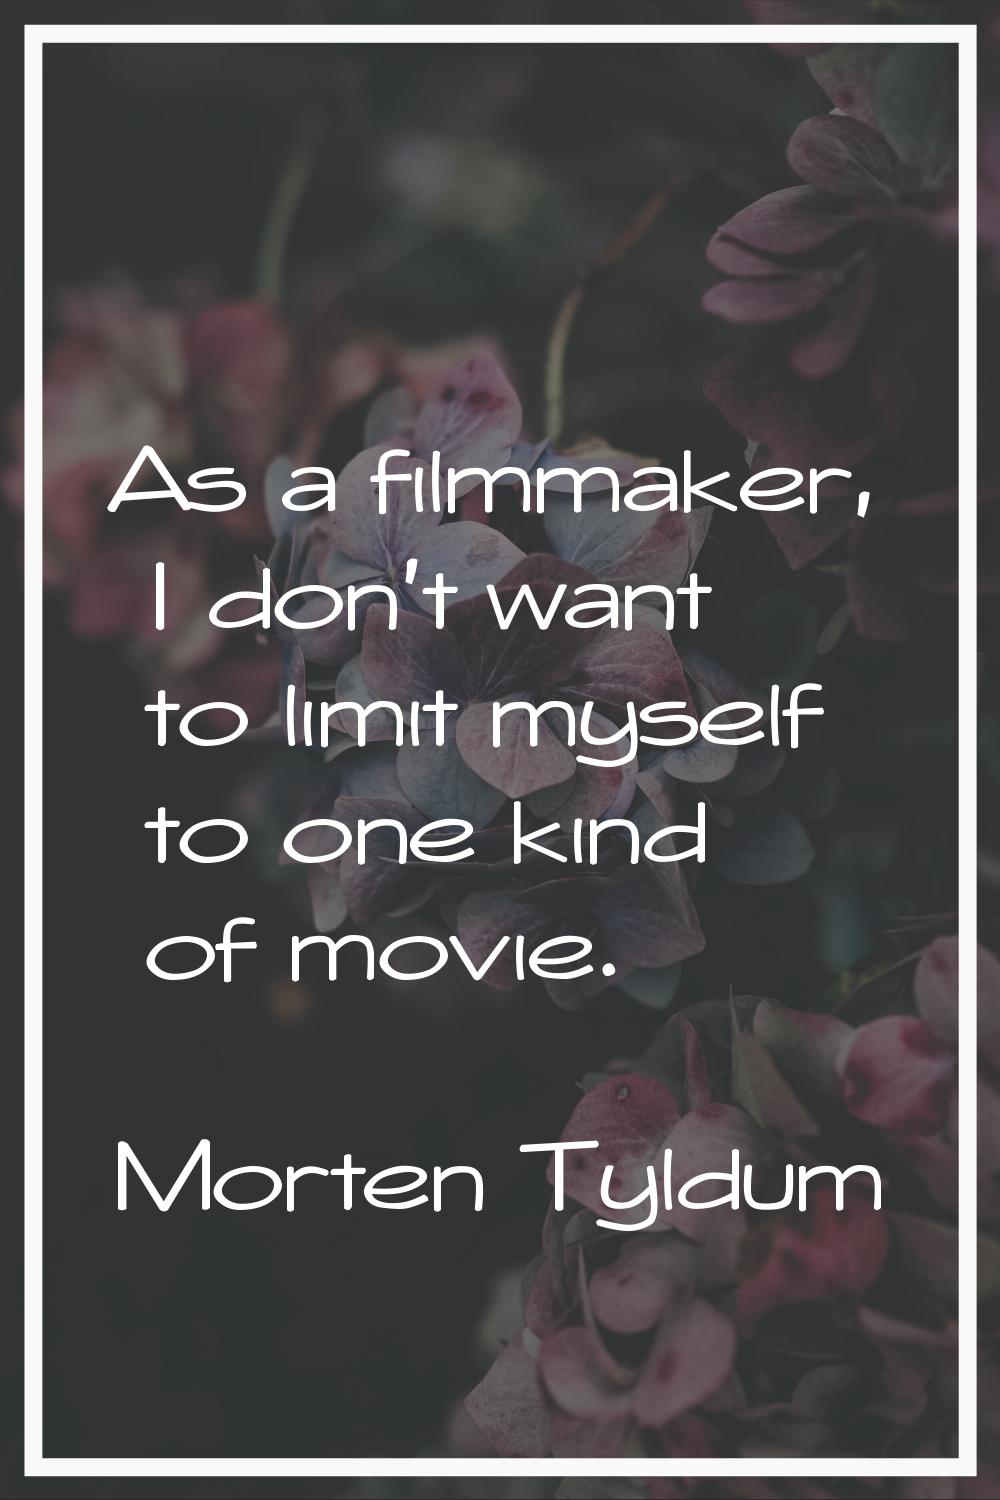 As a filmmaker, I don't want to limit myself to one kind of movie.